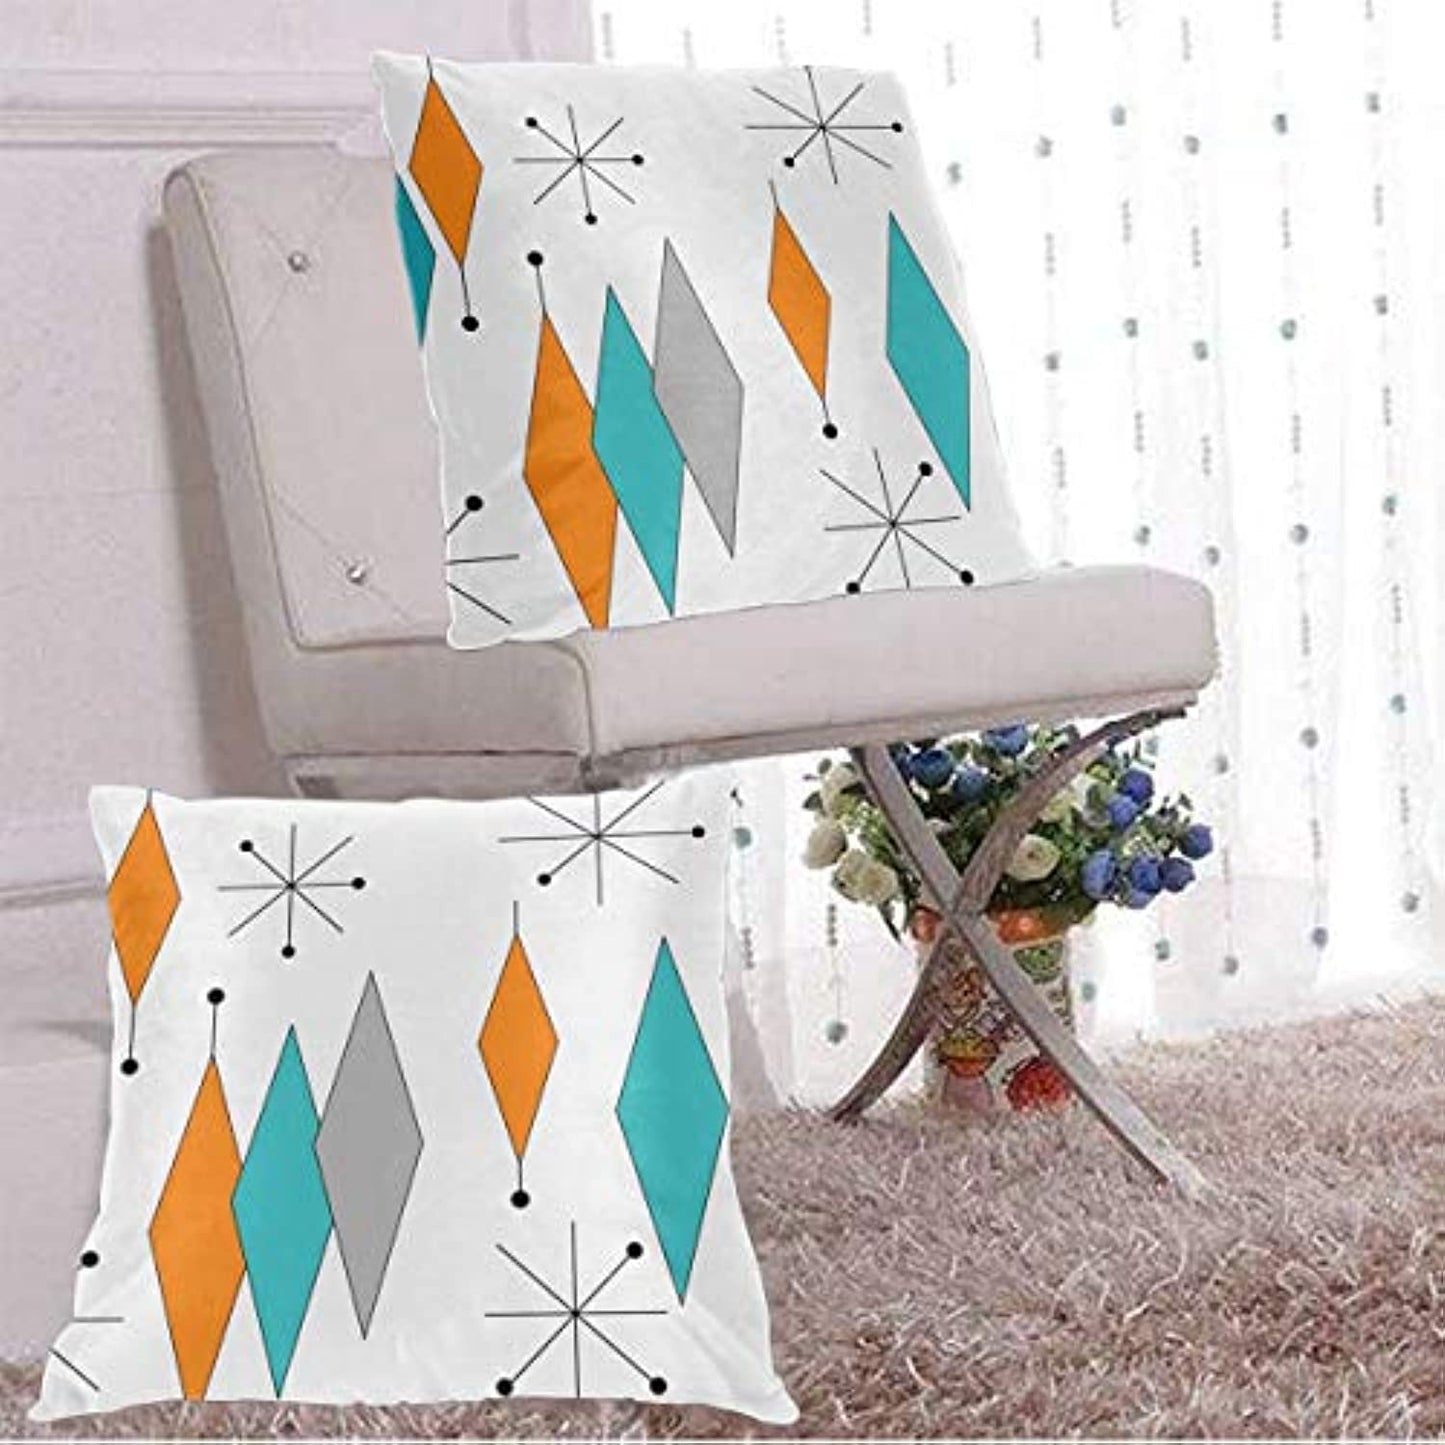 Wnoesat Turquoise Orange Diamond Pillow Covers Set of 2 Mid Century Throw Pillow Covers Retro Starburst Cushion Cover Modern Decorative Pillowcases for Sofa Bed Couch Chair 18 x 18